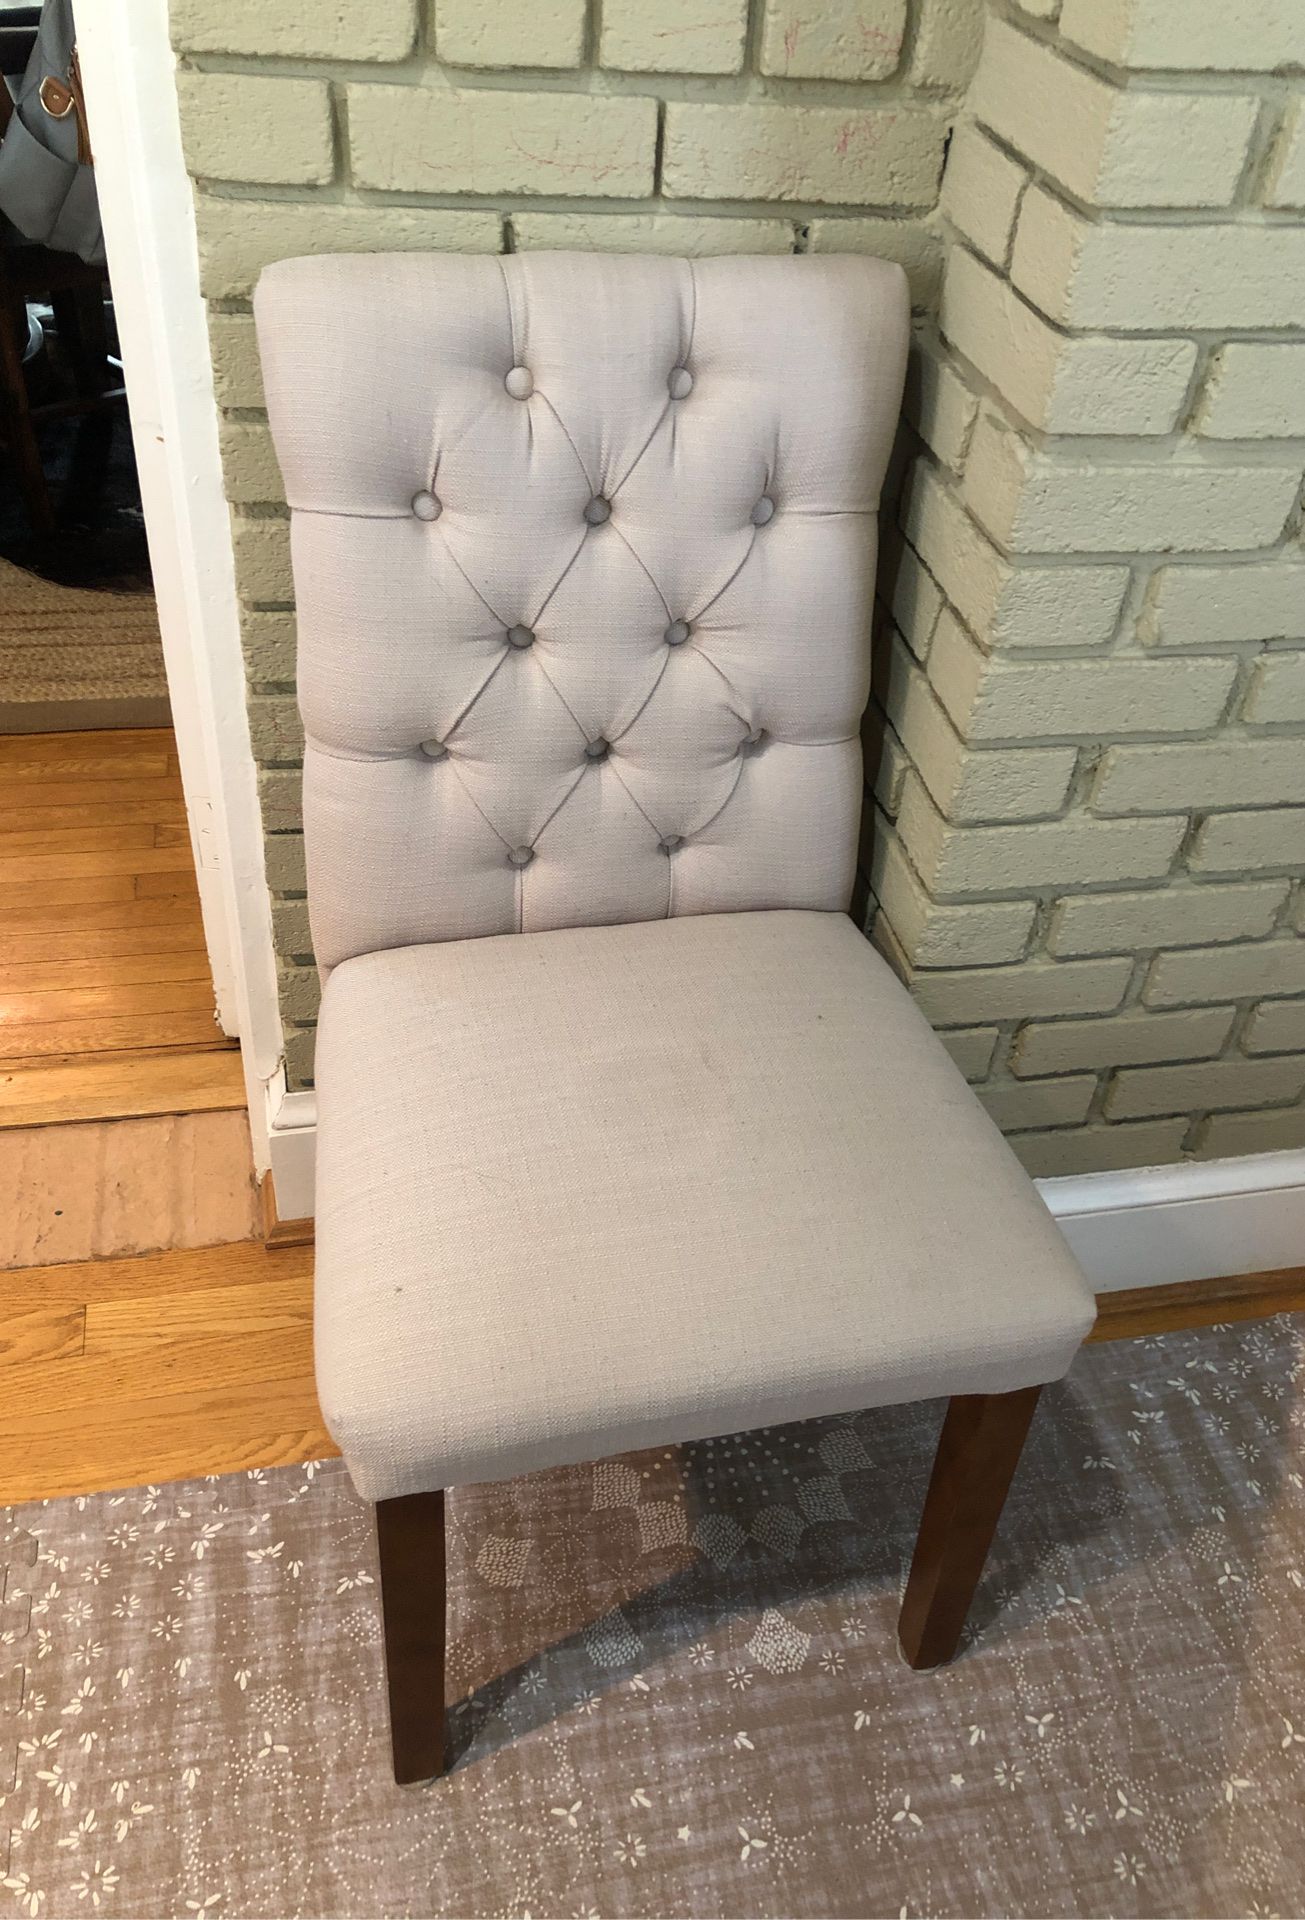 Desk/dining chair